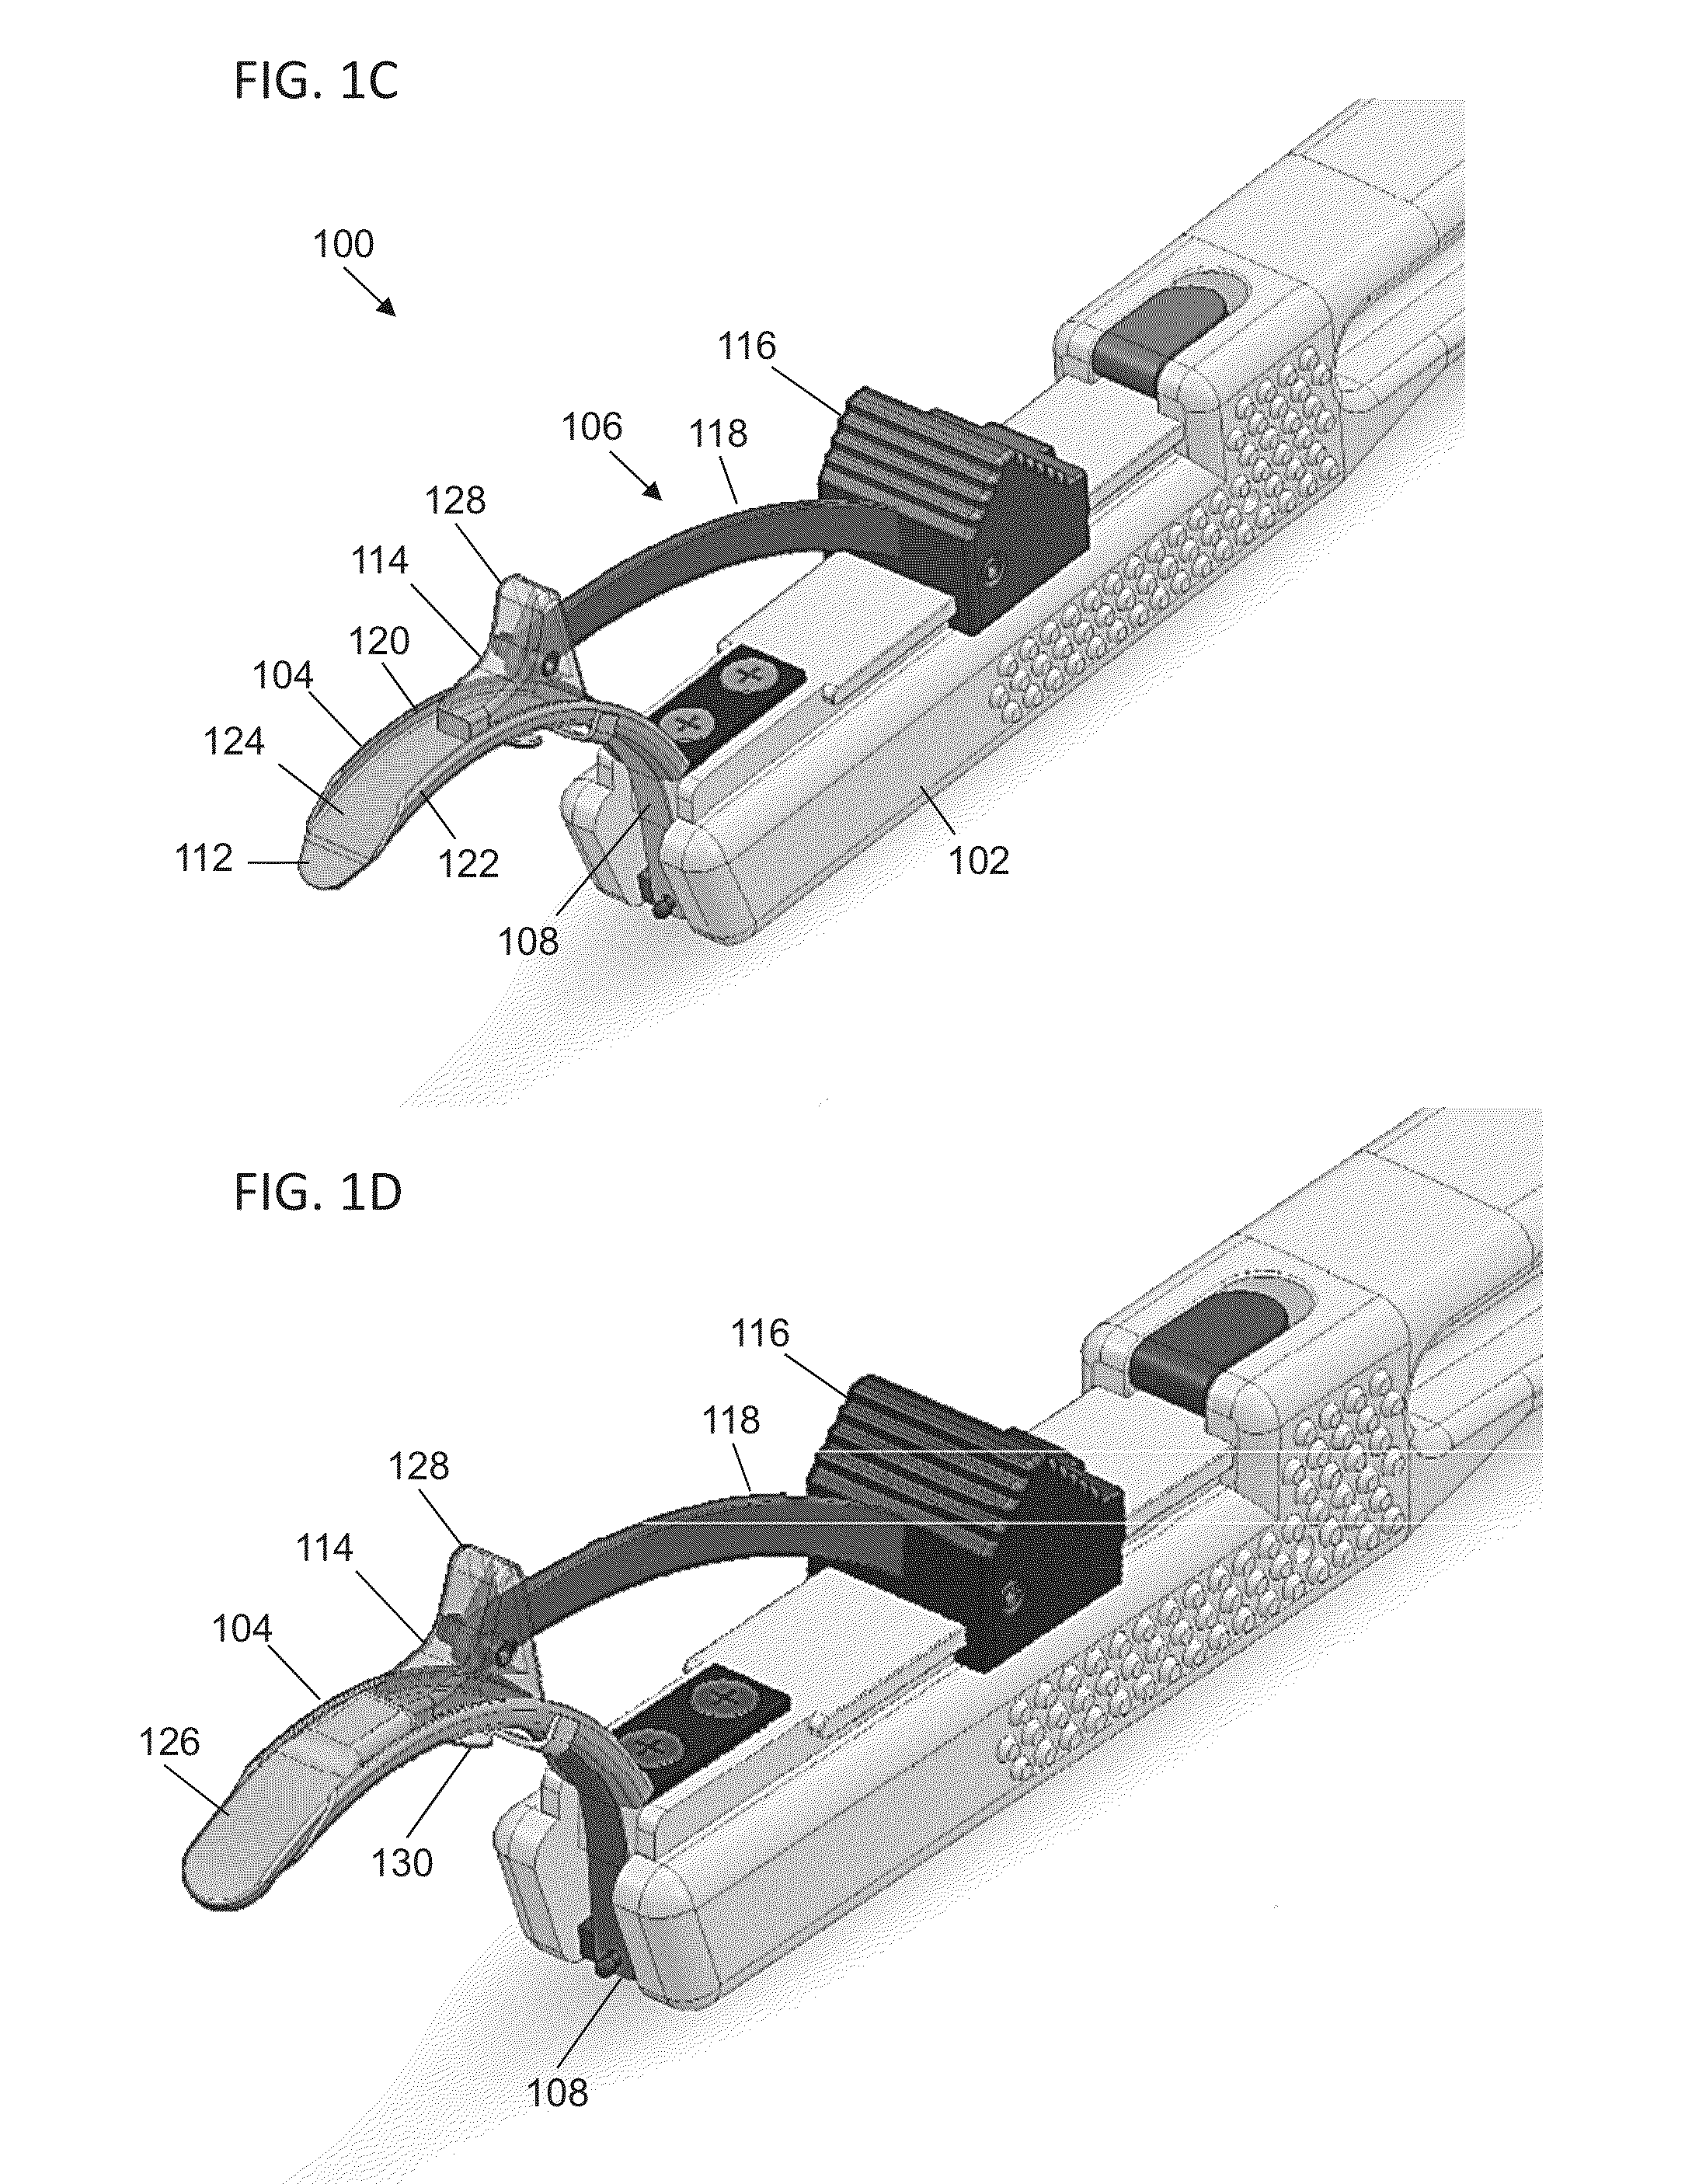 Implant delivery devices, systems, and methods